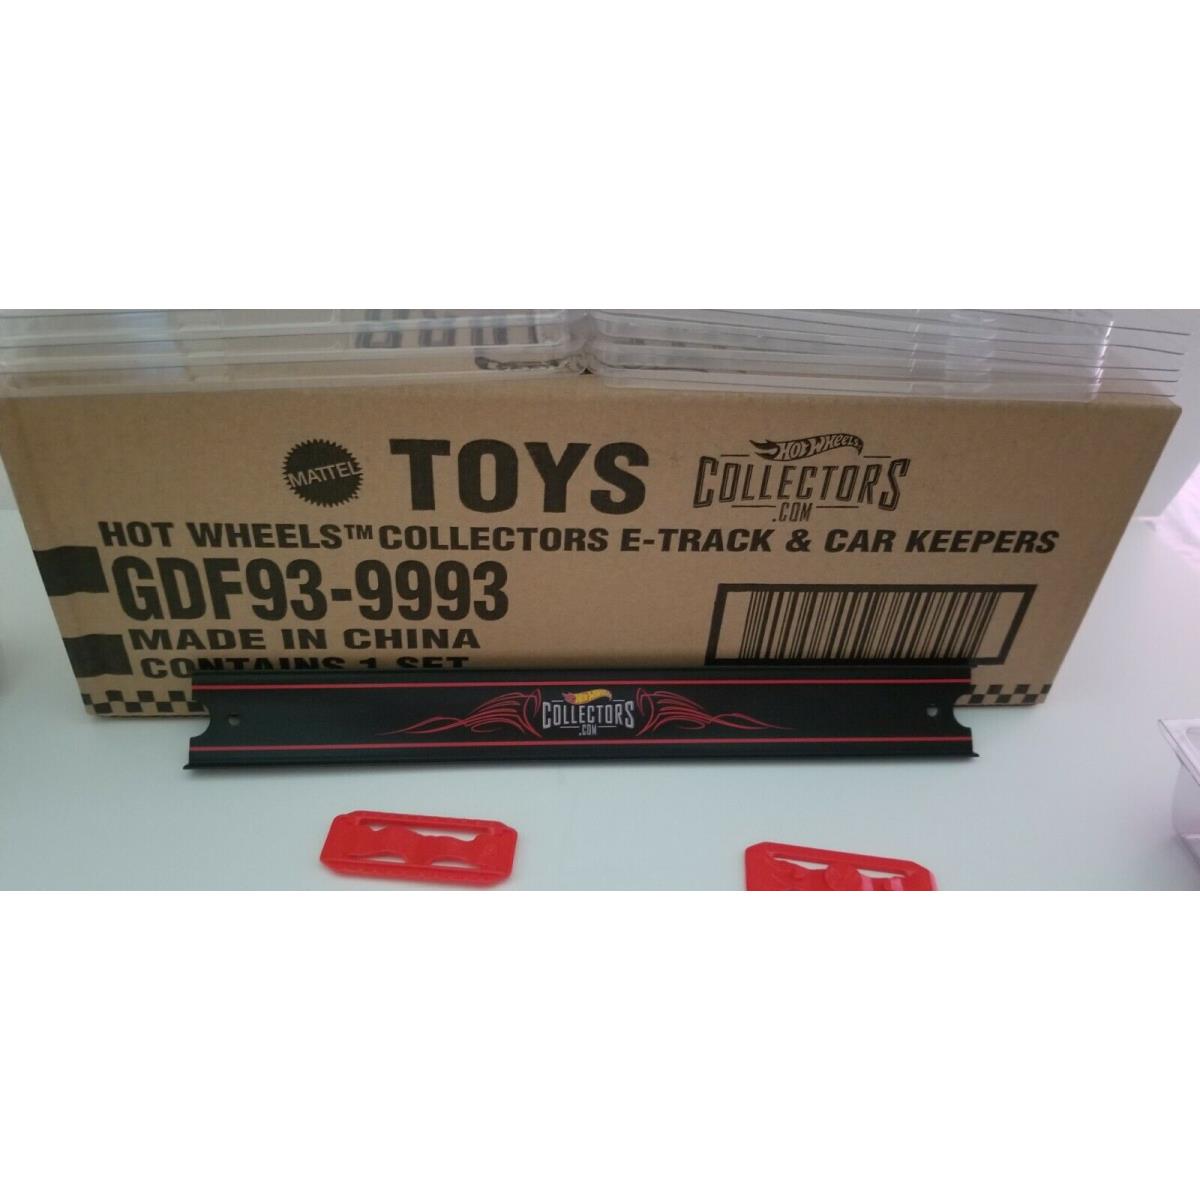 Hot Wheels Kar Keepers and Track Collectors Club Exclusive Limited Edition